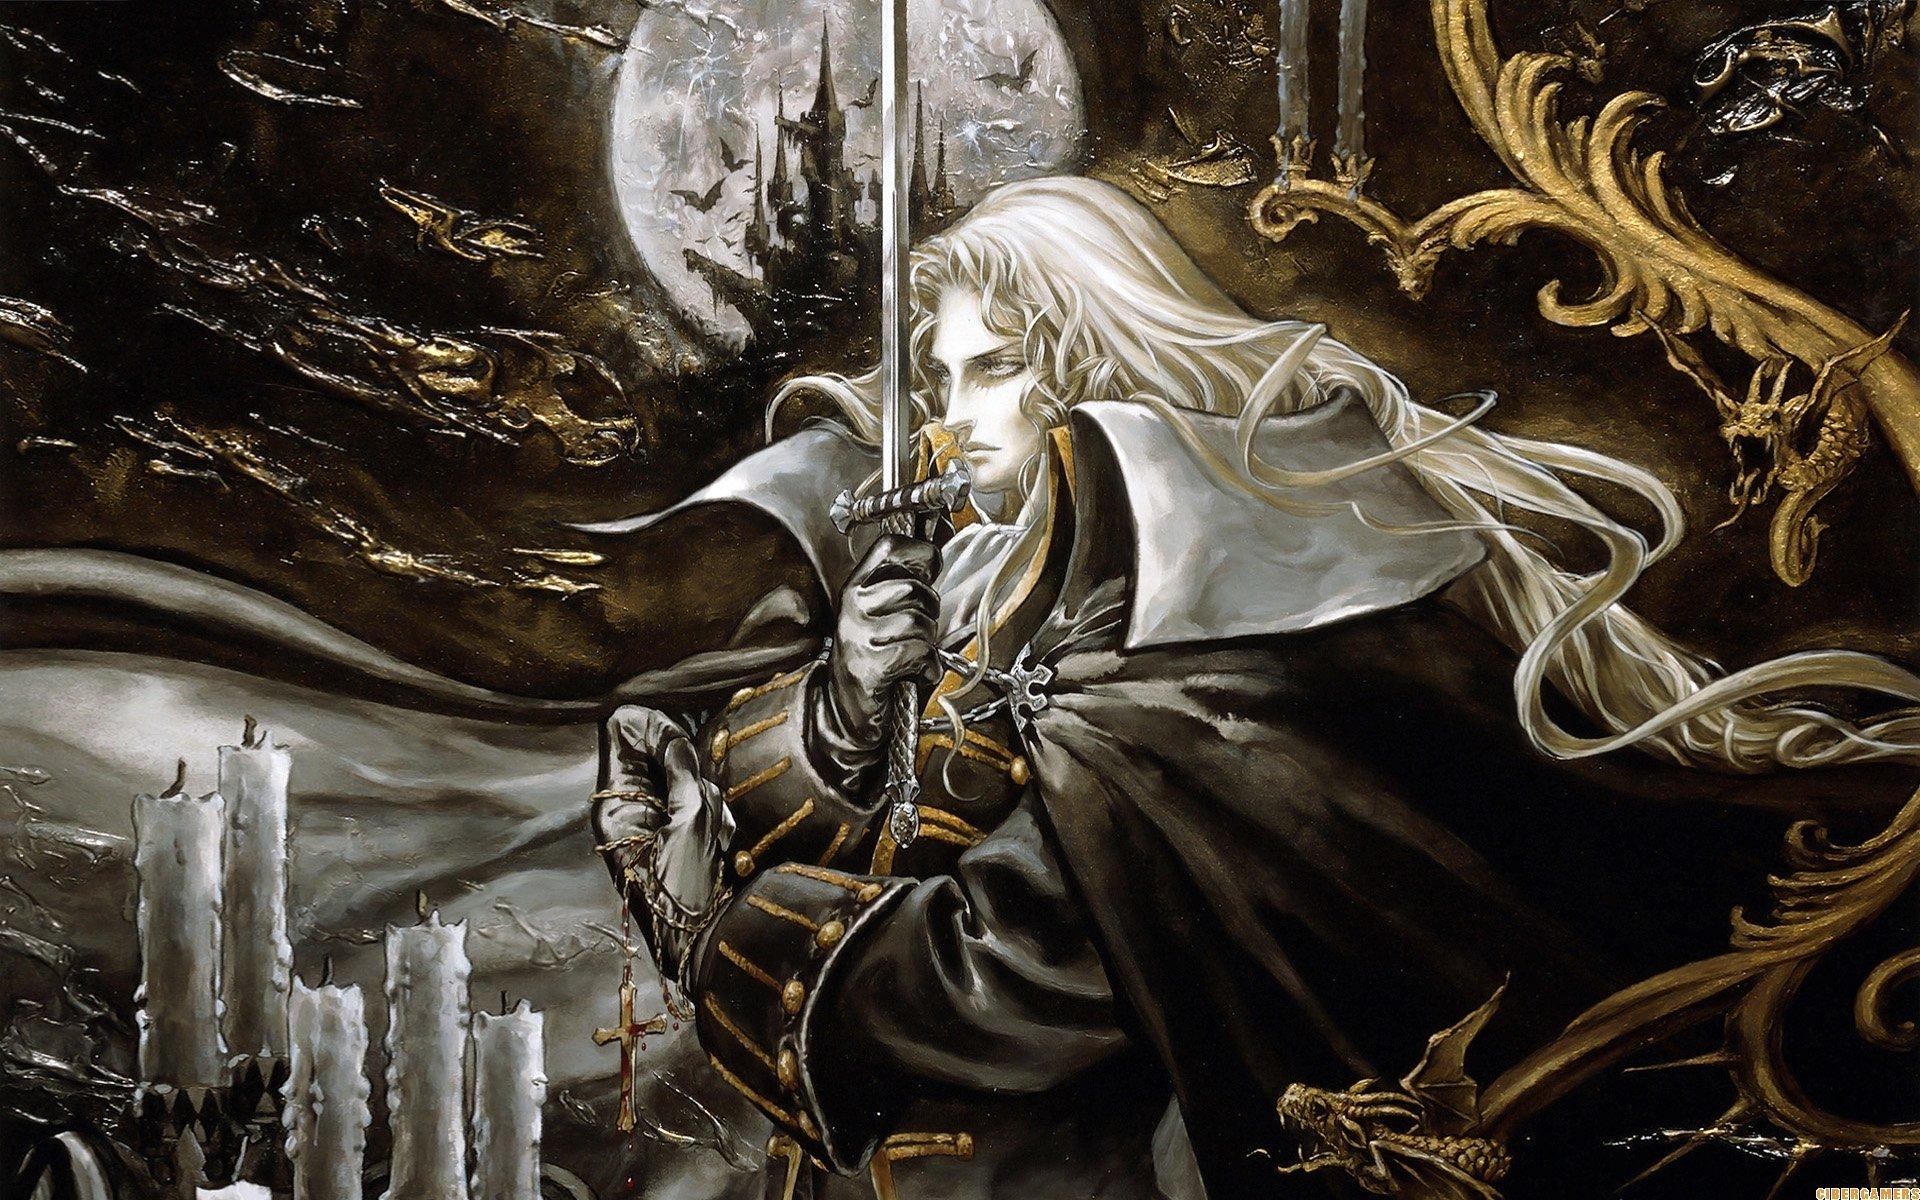 Castlevania: Symphony of the Night HD Wallpaper. Background